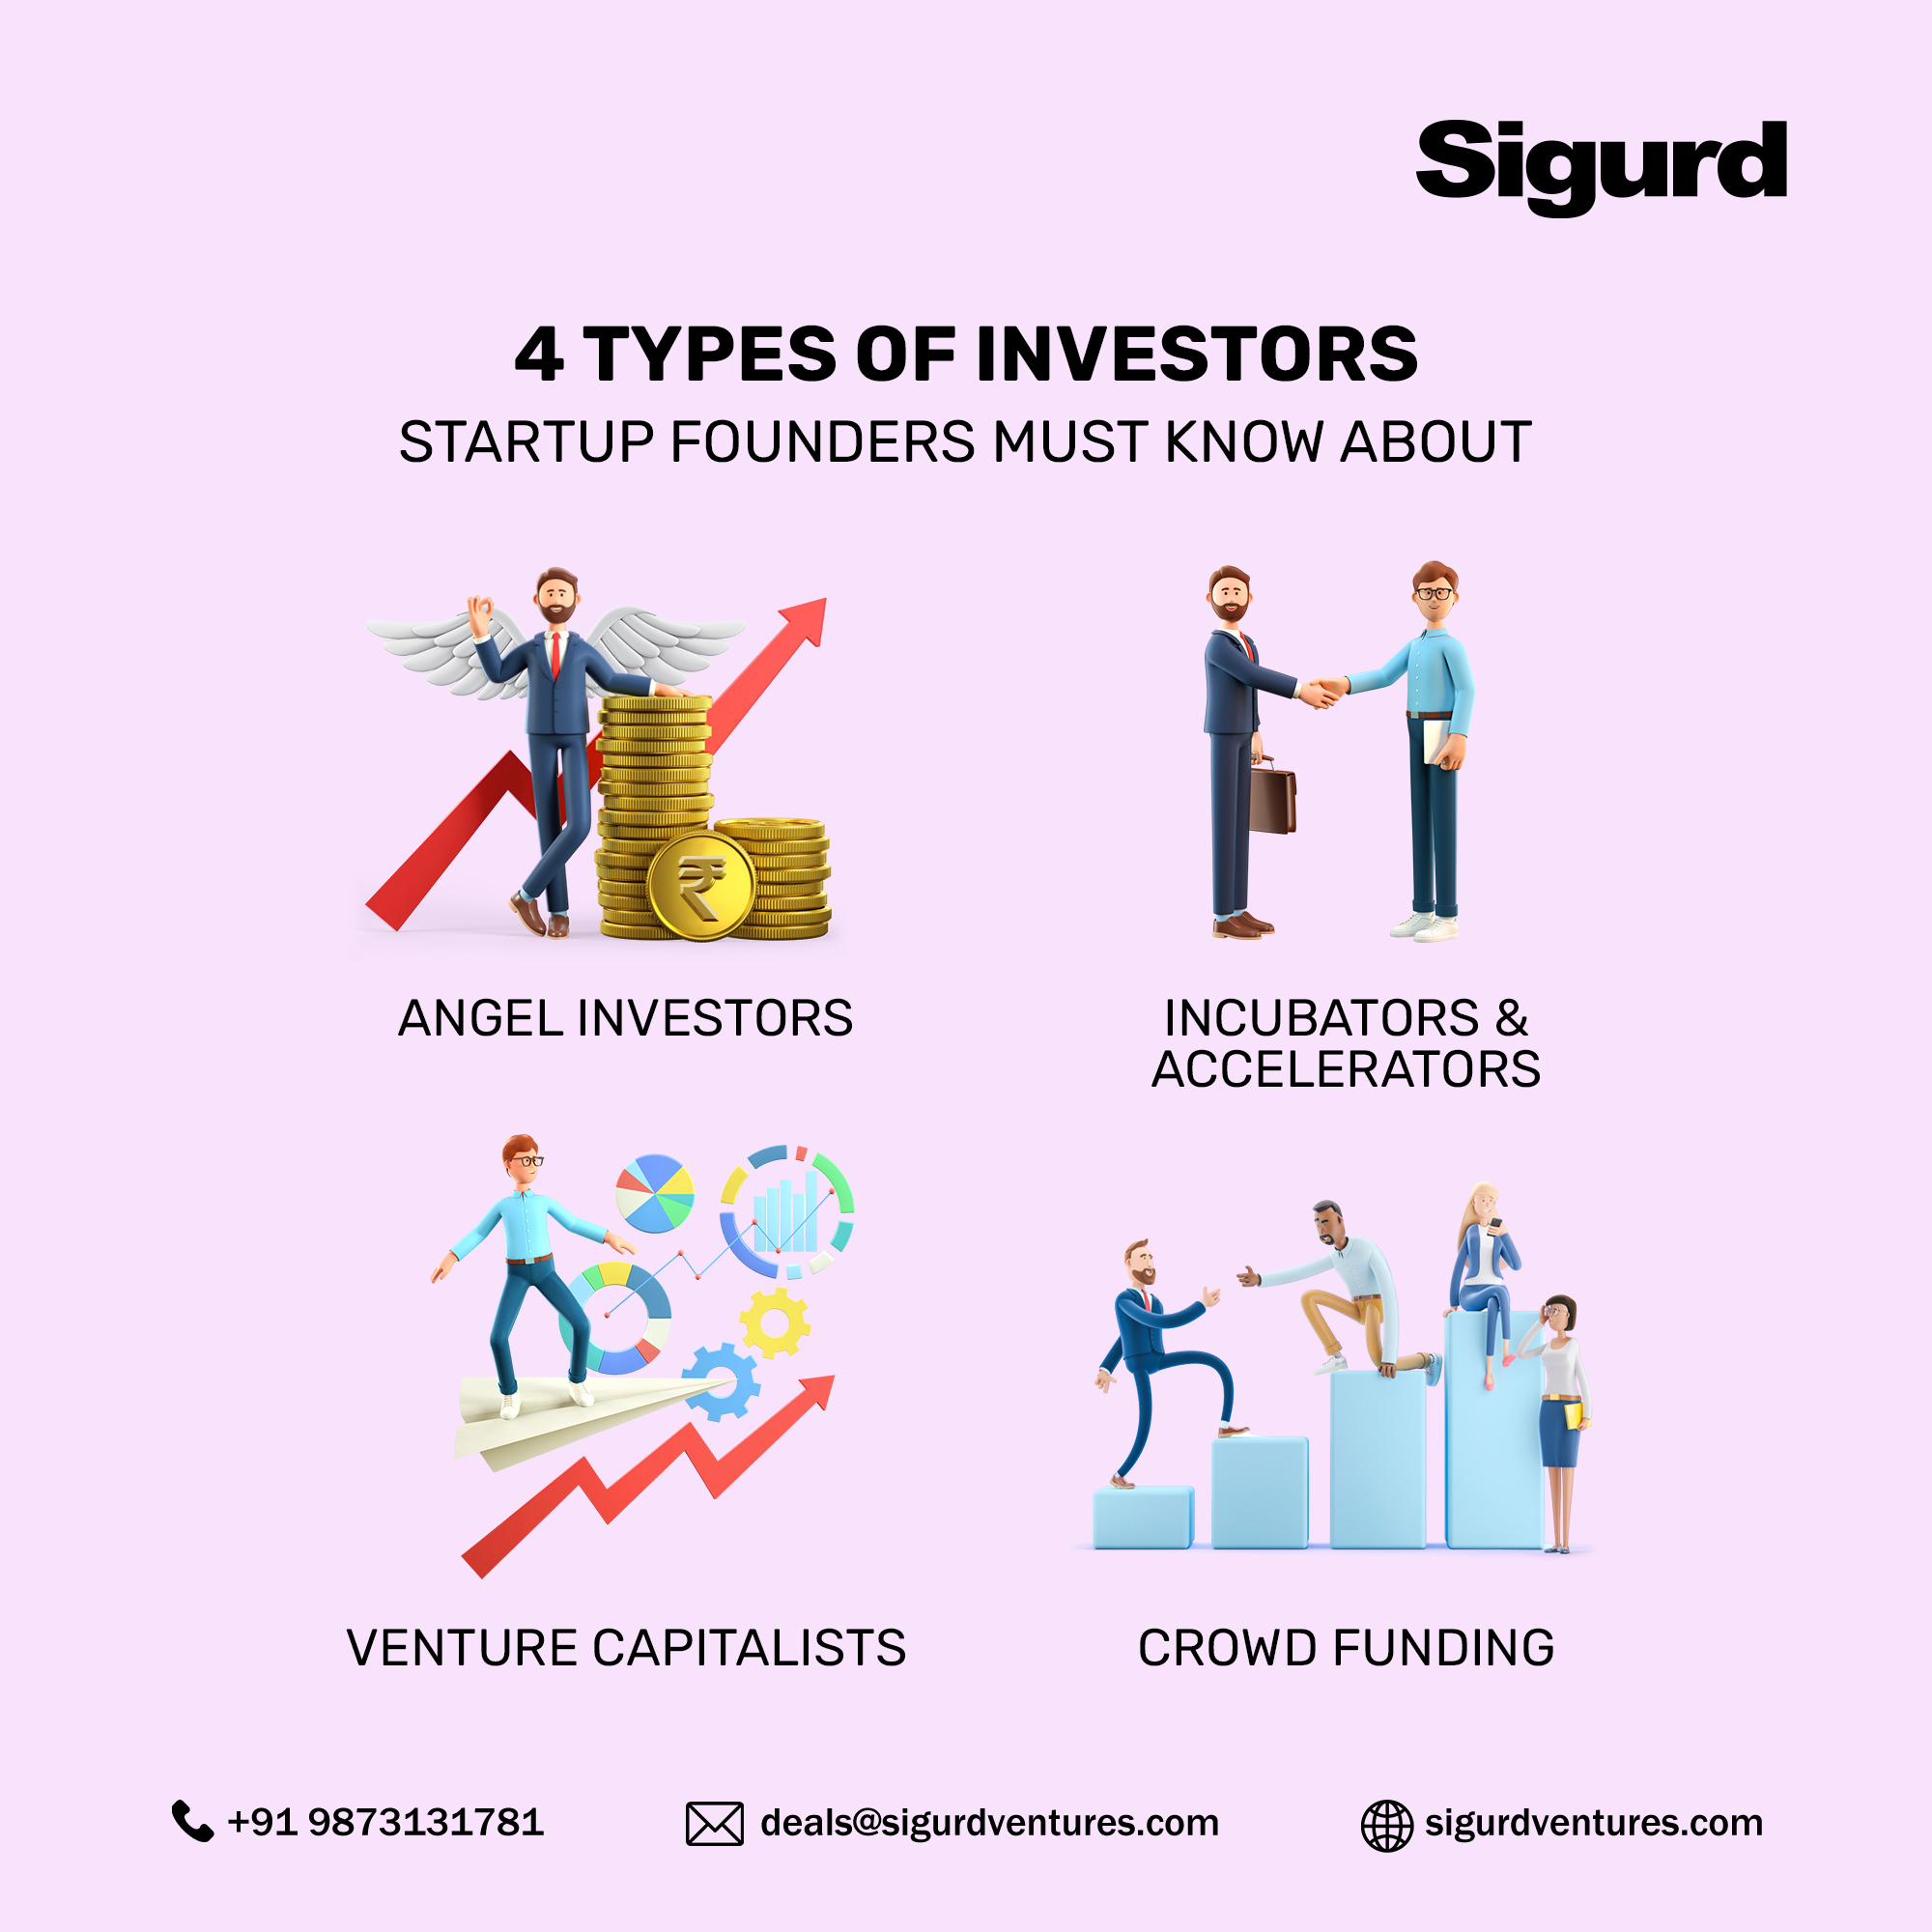 4 Types of investors startup founders must know about